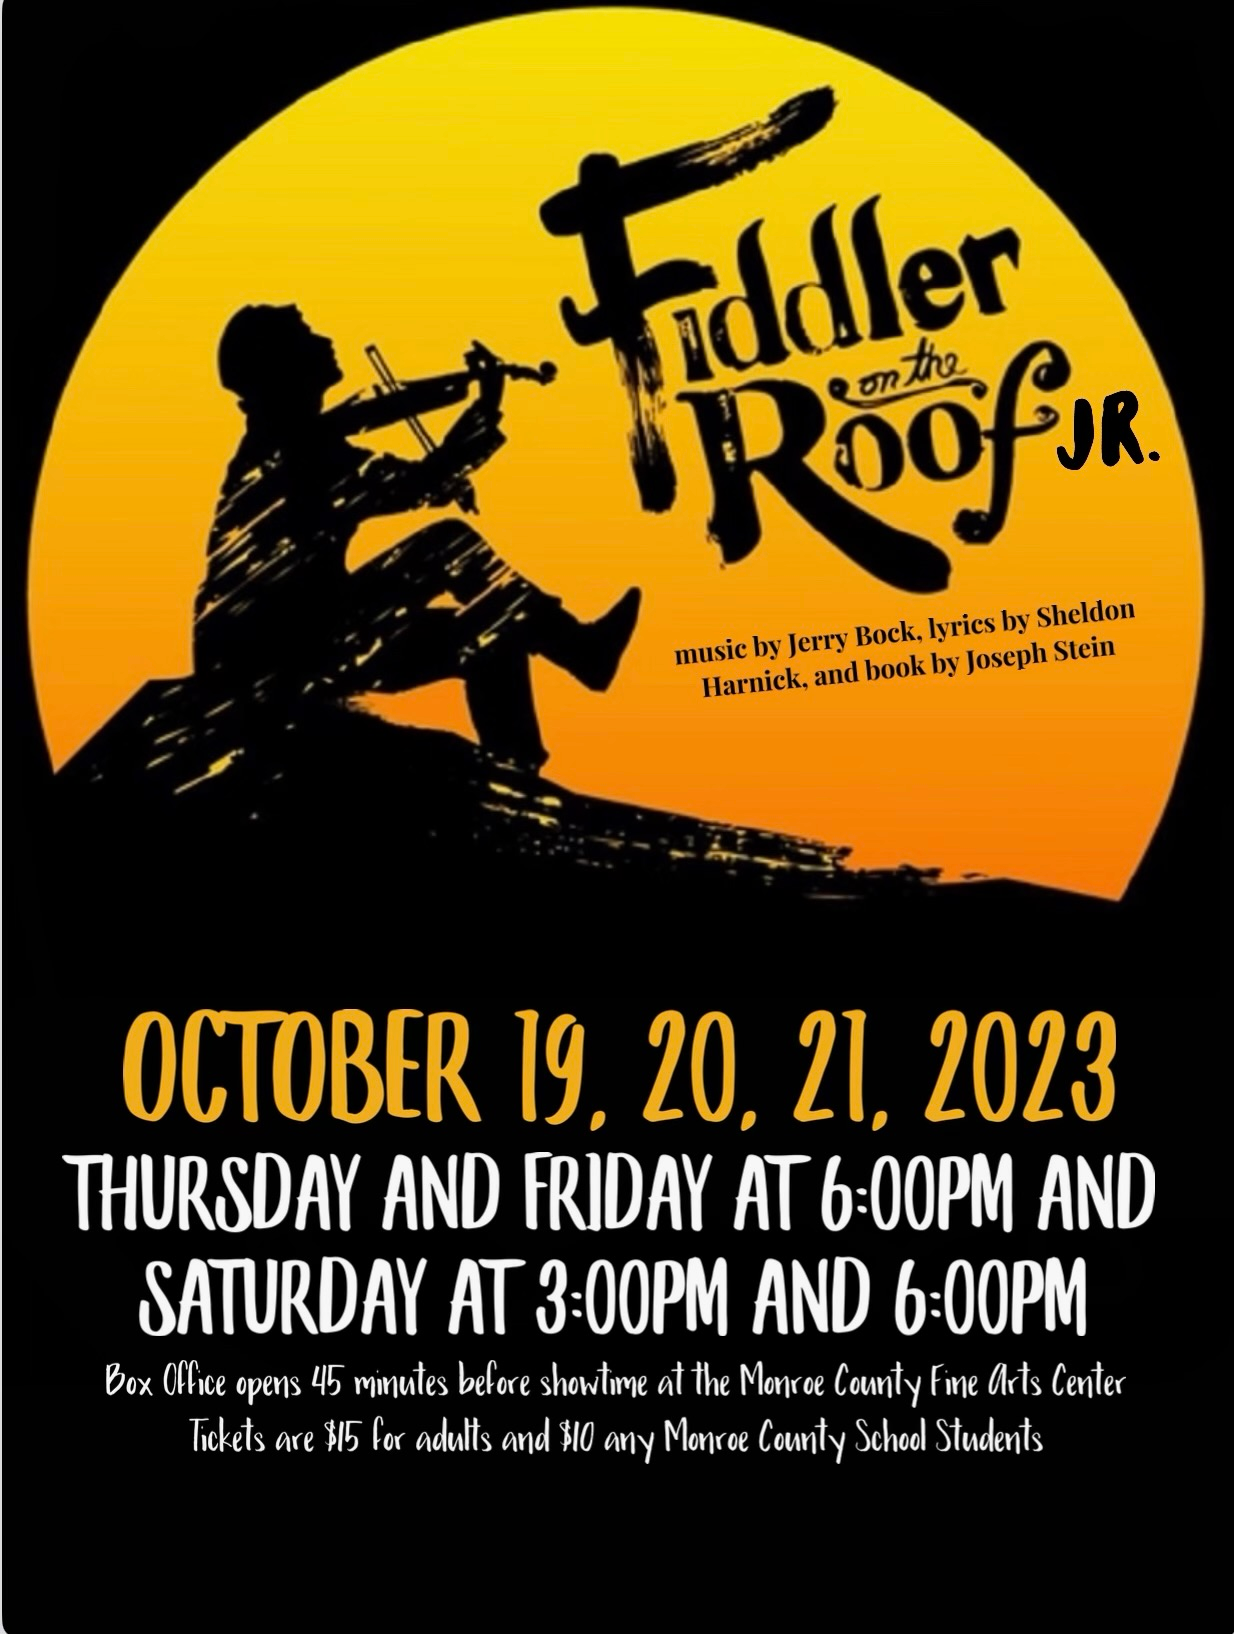 Fiddler on the Roof at the FAC October 19 - 21